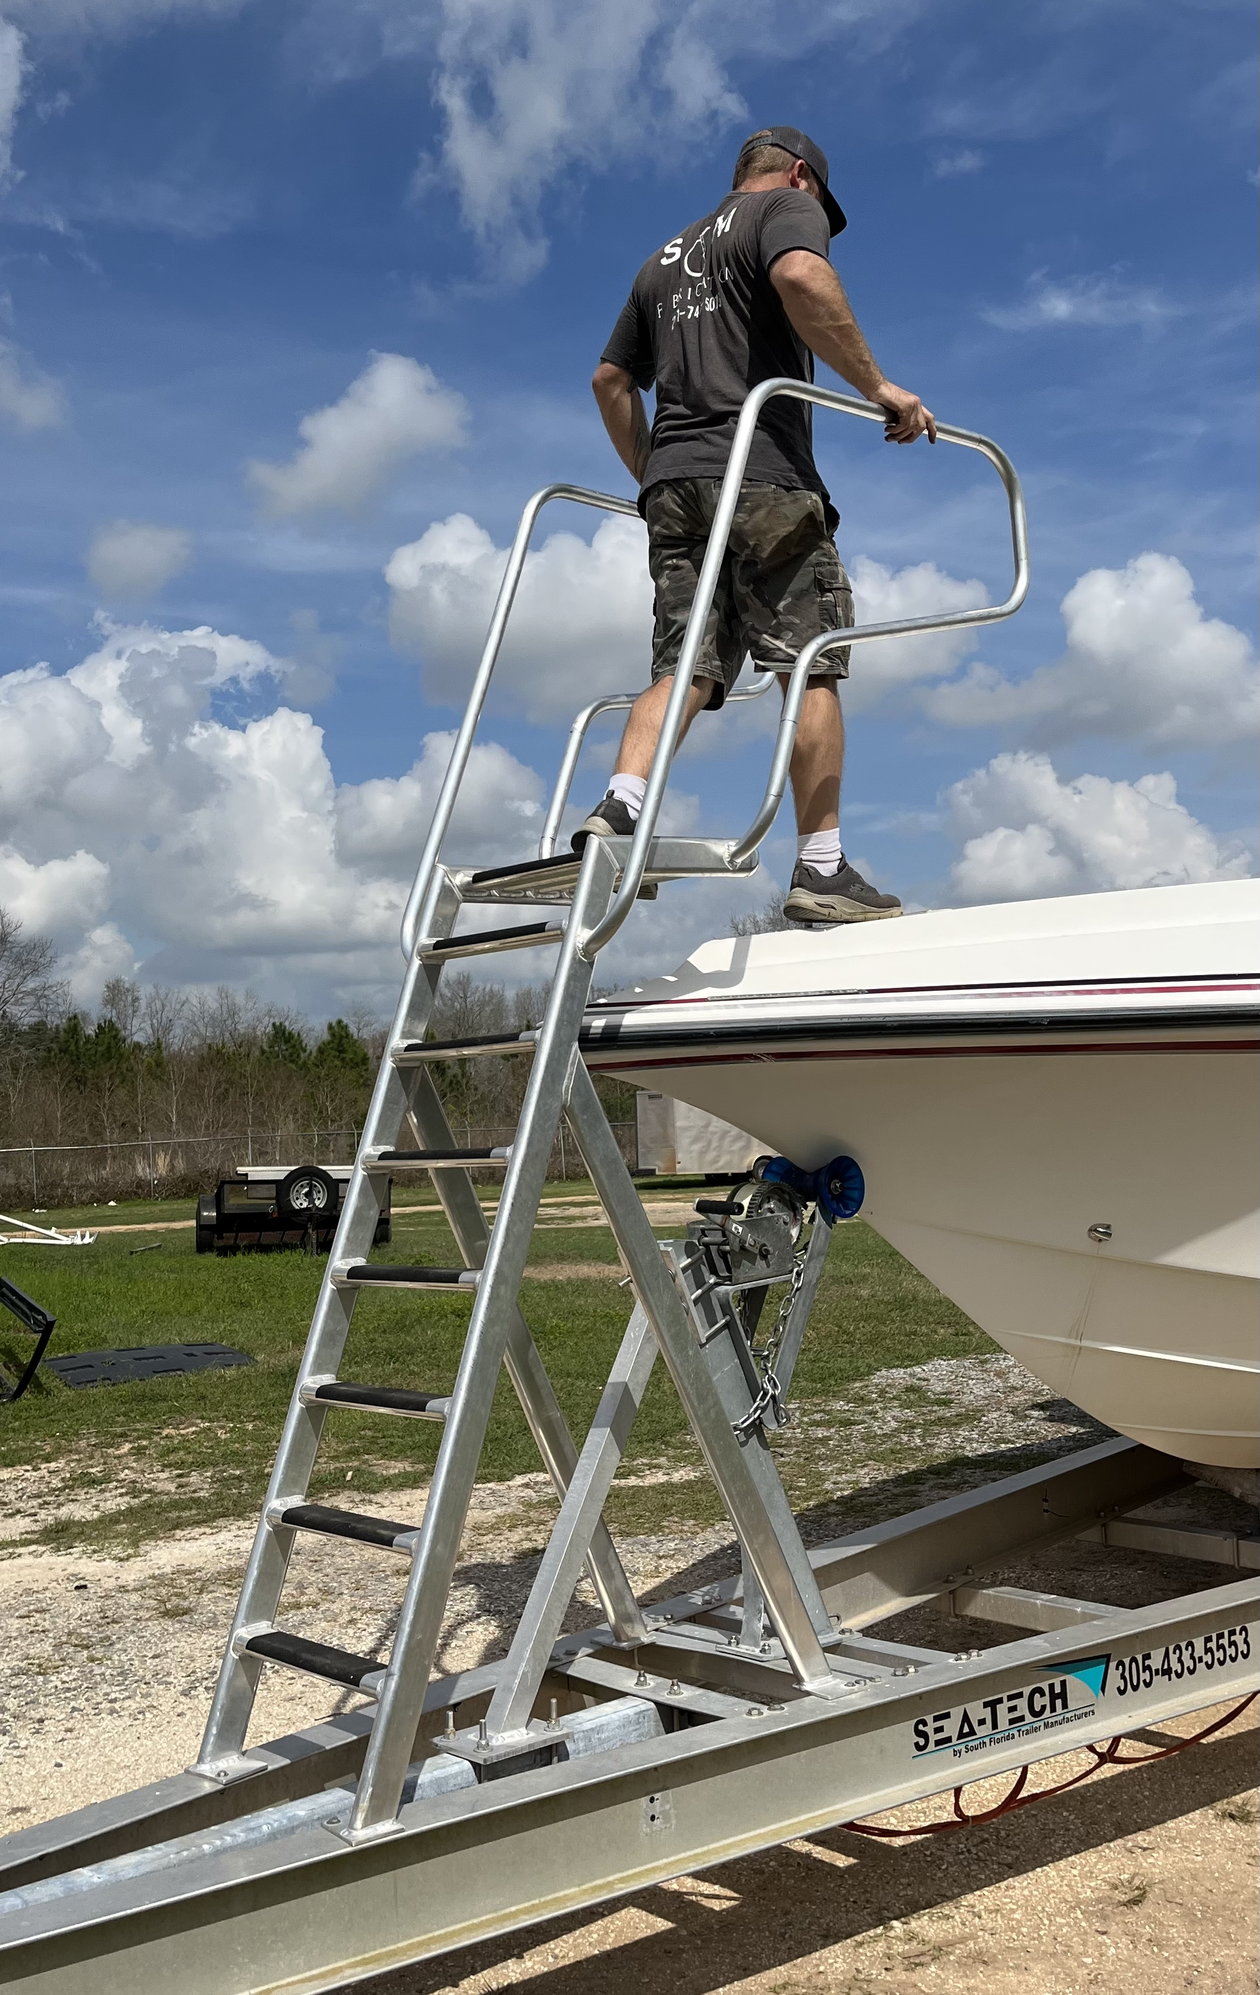 Trailer ladder - The Hull Truth - Boating and Fishing Forum